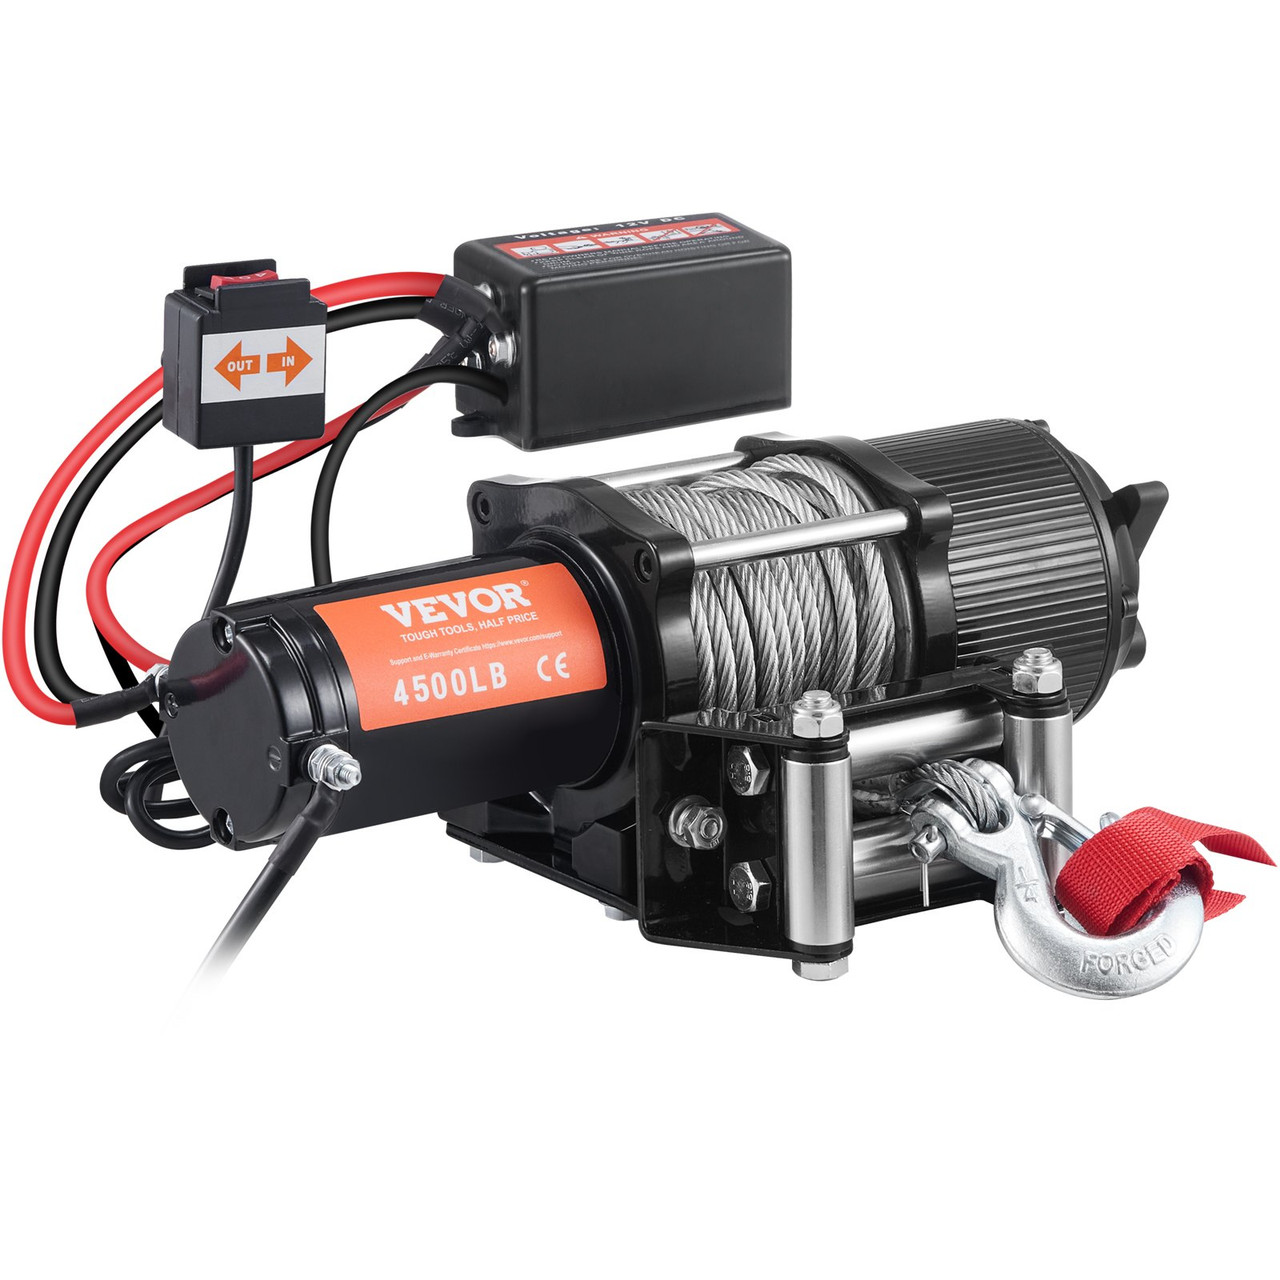 VEVOR Electric Winch, 12V 4500 lb Load Capacity Steel Rope Winch, IP55 1/4” x 39ft ATV UTV Winch with Wireless Handheld Remote & 4-Way Fairlead for Towing Jeep Off-Road SUV Truck Car Trailer Boat